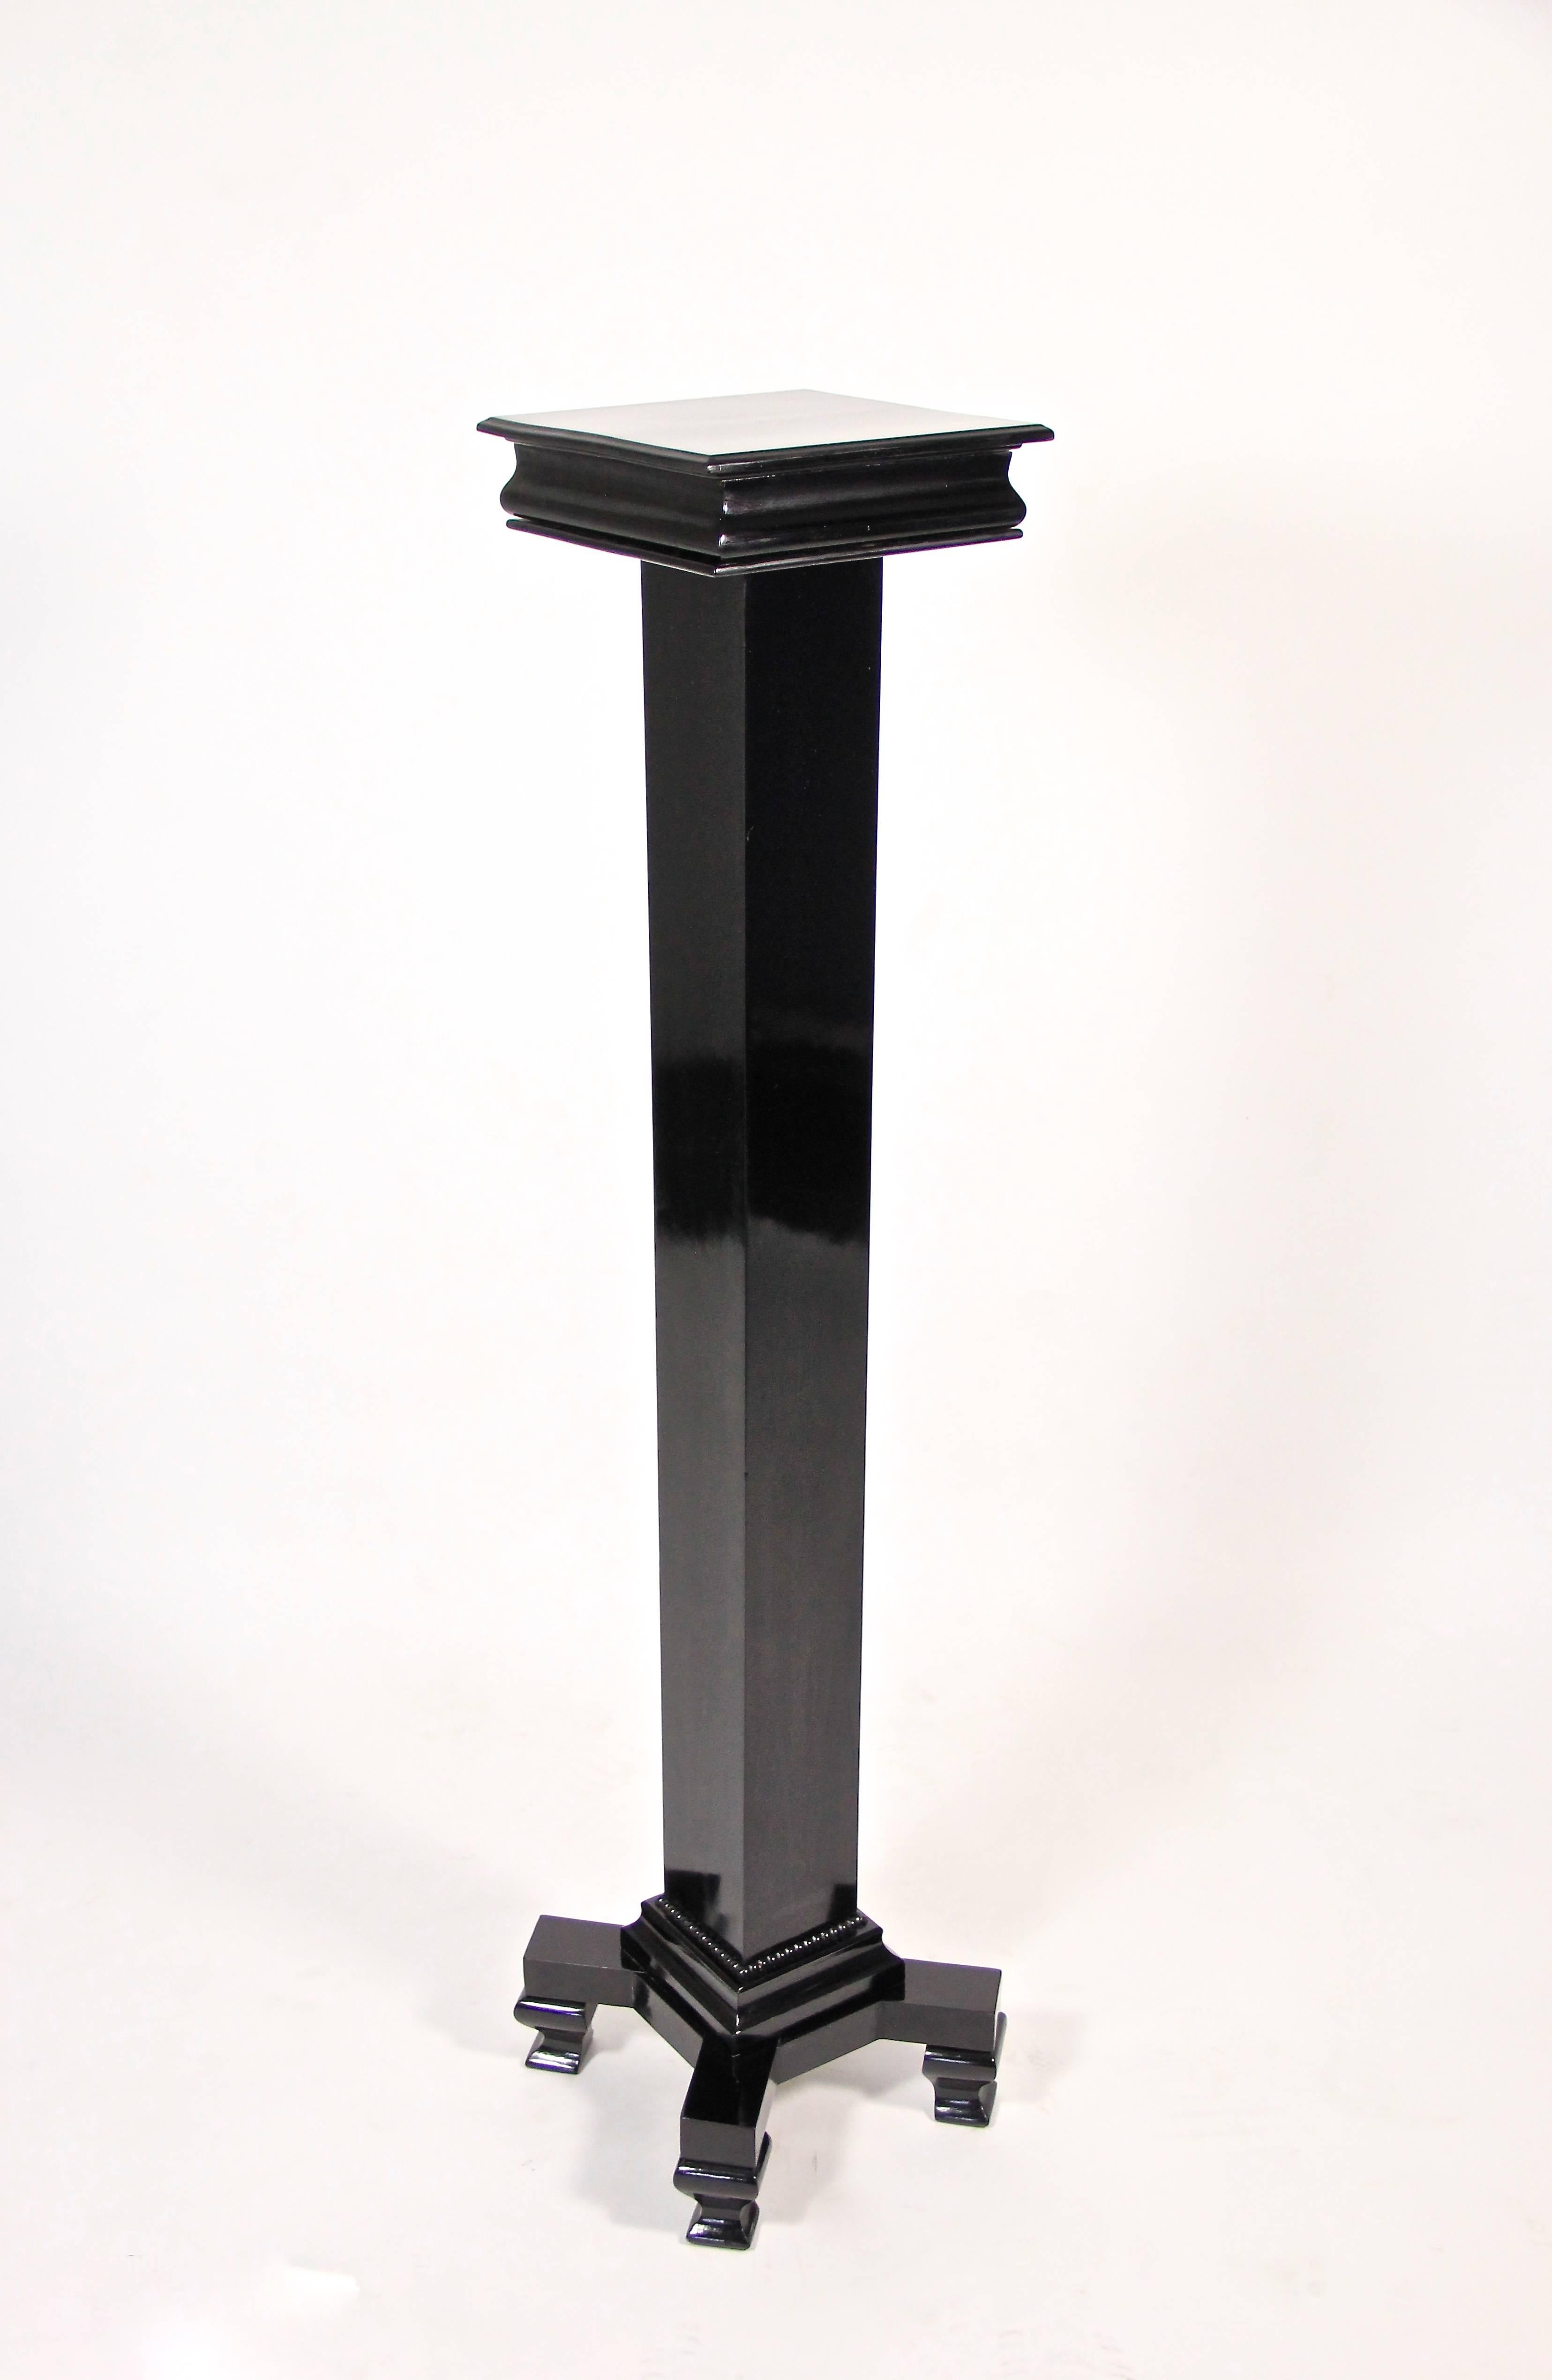 Breathtaking architectural Art Deco pedestal/ column from circa 1920 in Austria made of fine fruitwood. Ebonized and finalized with a glossy hand polished shellac finish, this pedestal impresses with a straight architectural design. Reduced to clear